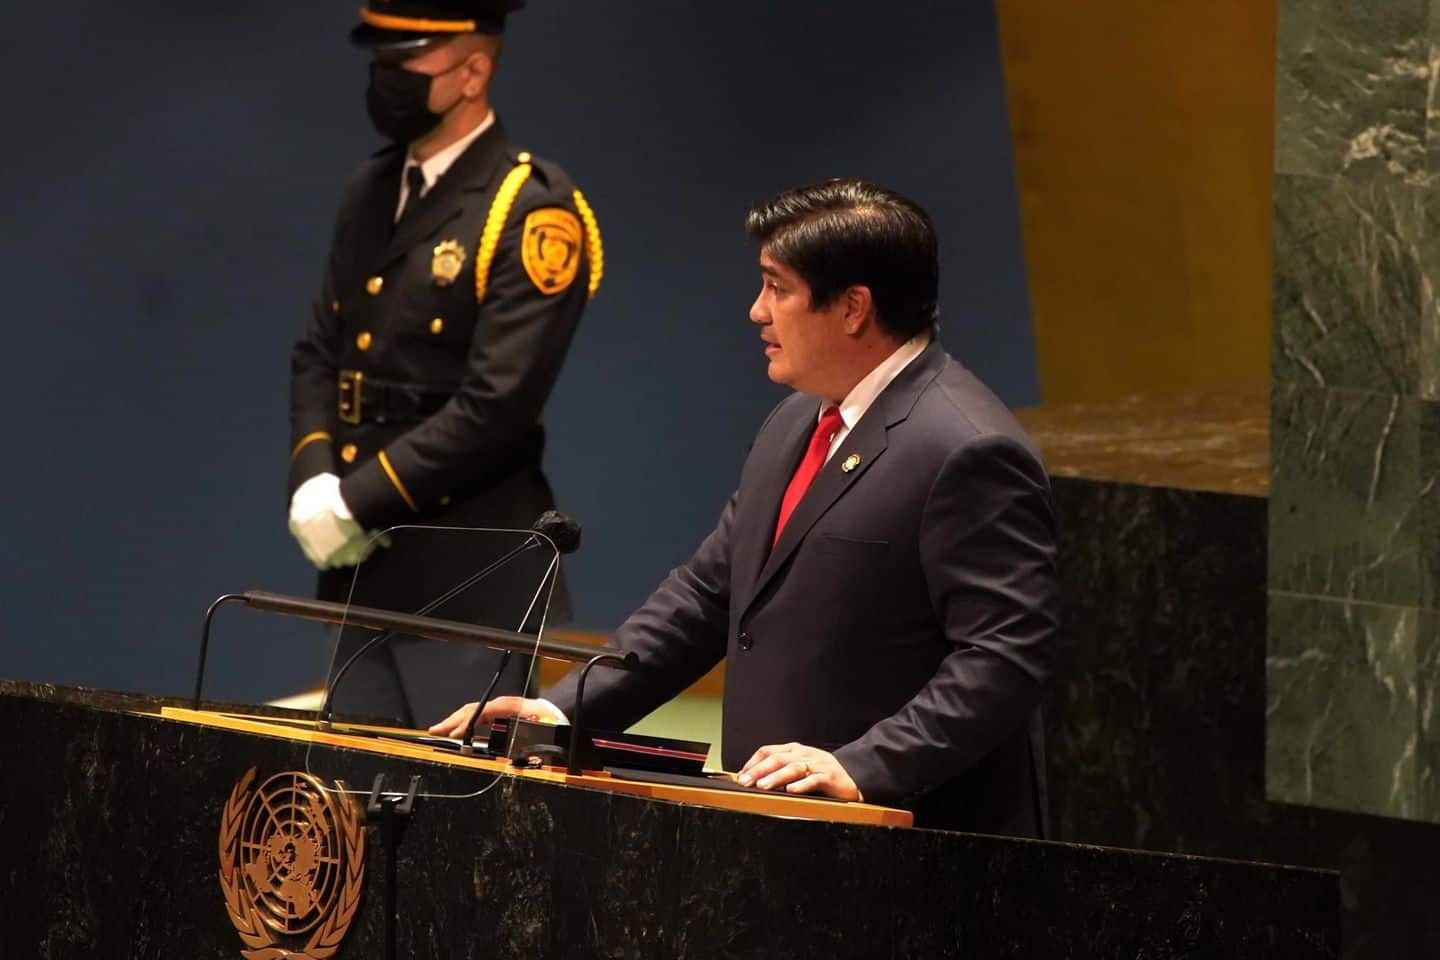 Costa Rica's Carlos Alvarado speaks at the UN General Assembly in New York City on September 21, 2021.